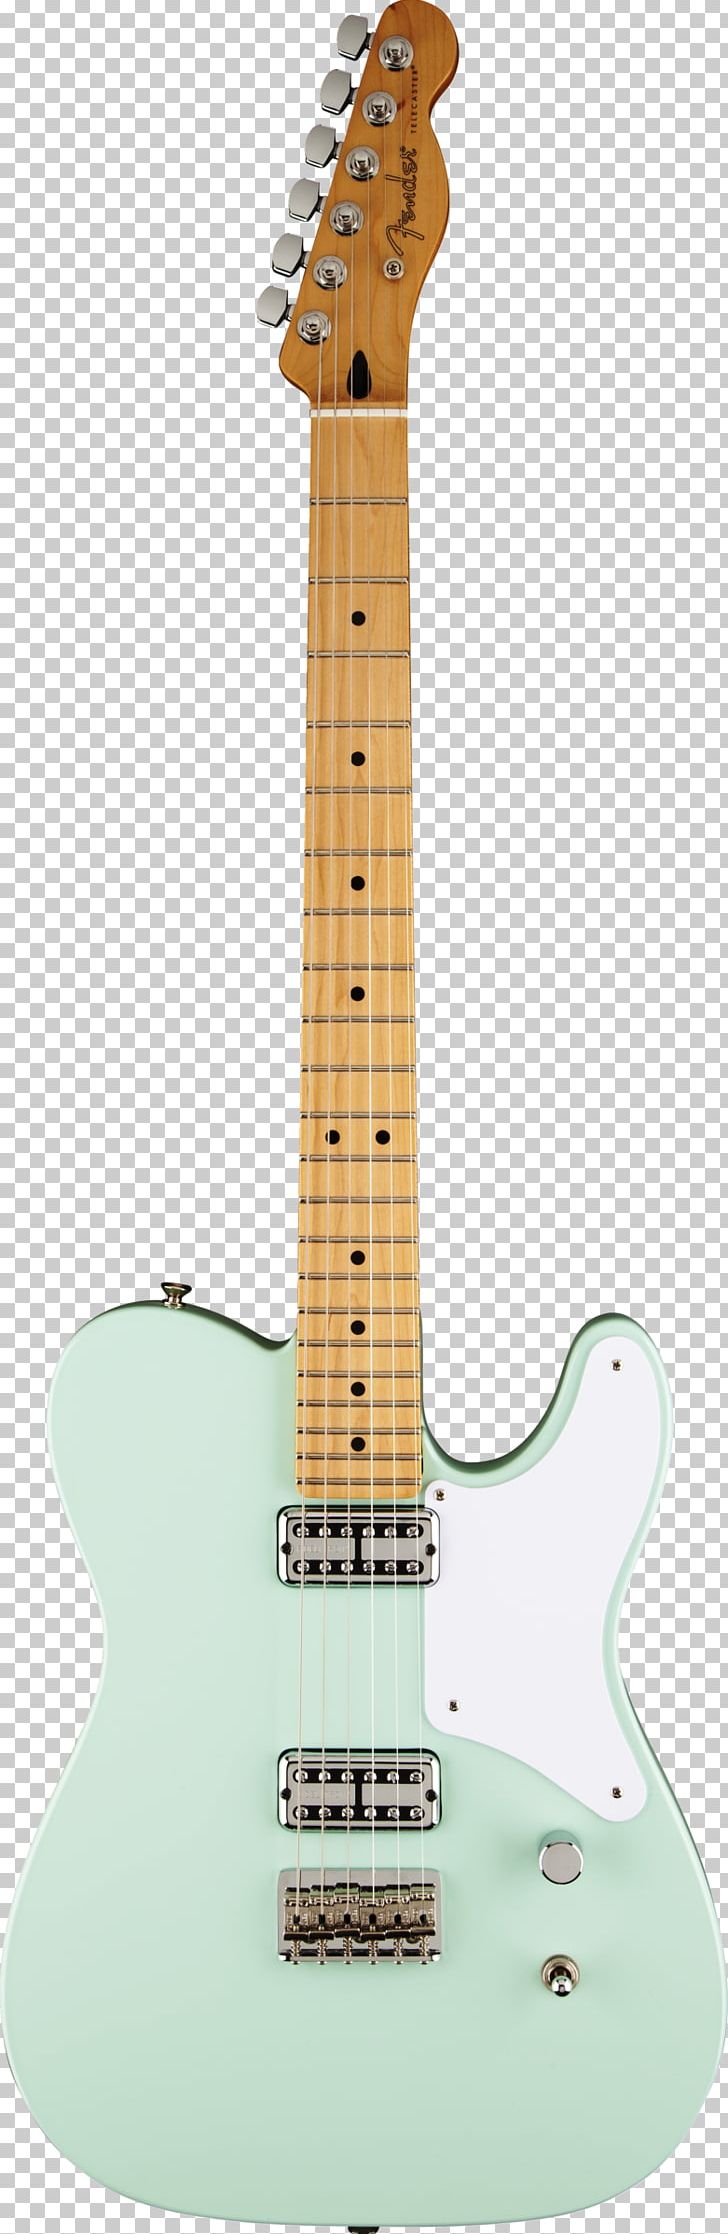 Electric Guitar Fender Telecaster Thinline Fender Stratocaster Fender Telecaster Custom PNG, Clipart, Acoustic Electric Guitar, Green, Guitar, Guitar Accessory, Musical Instrument Free PNG Download